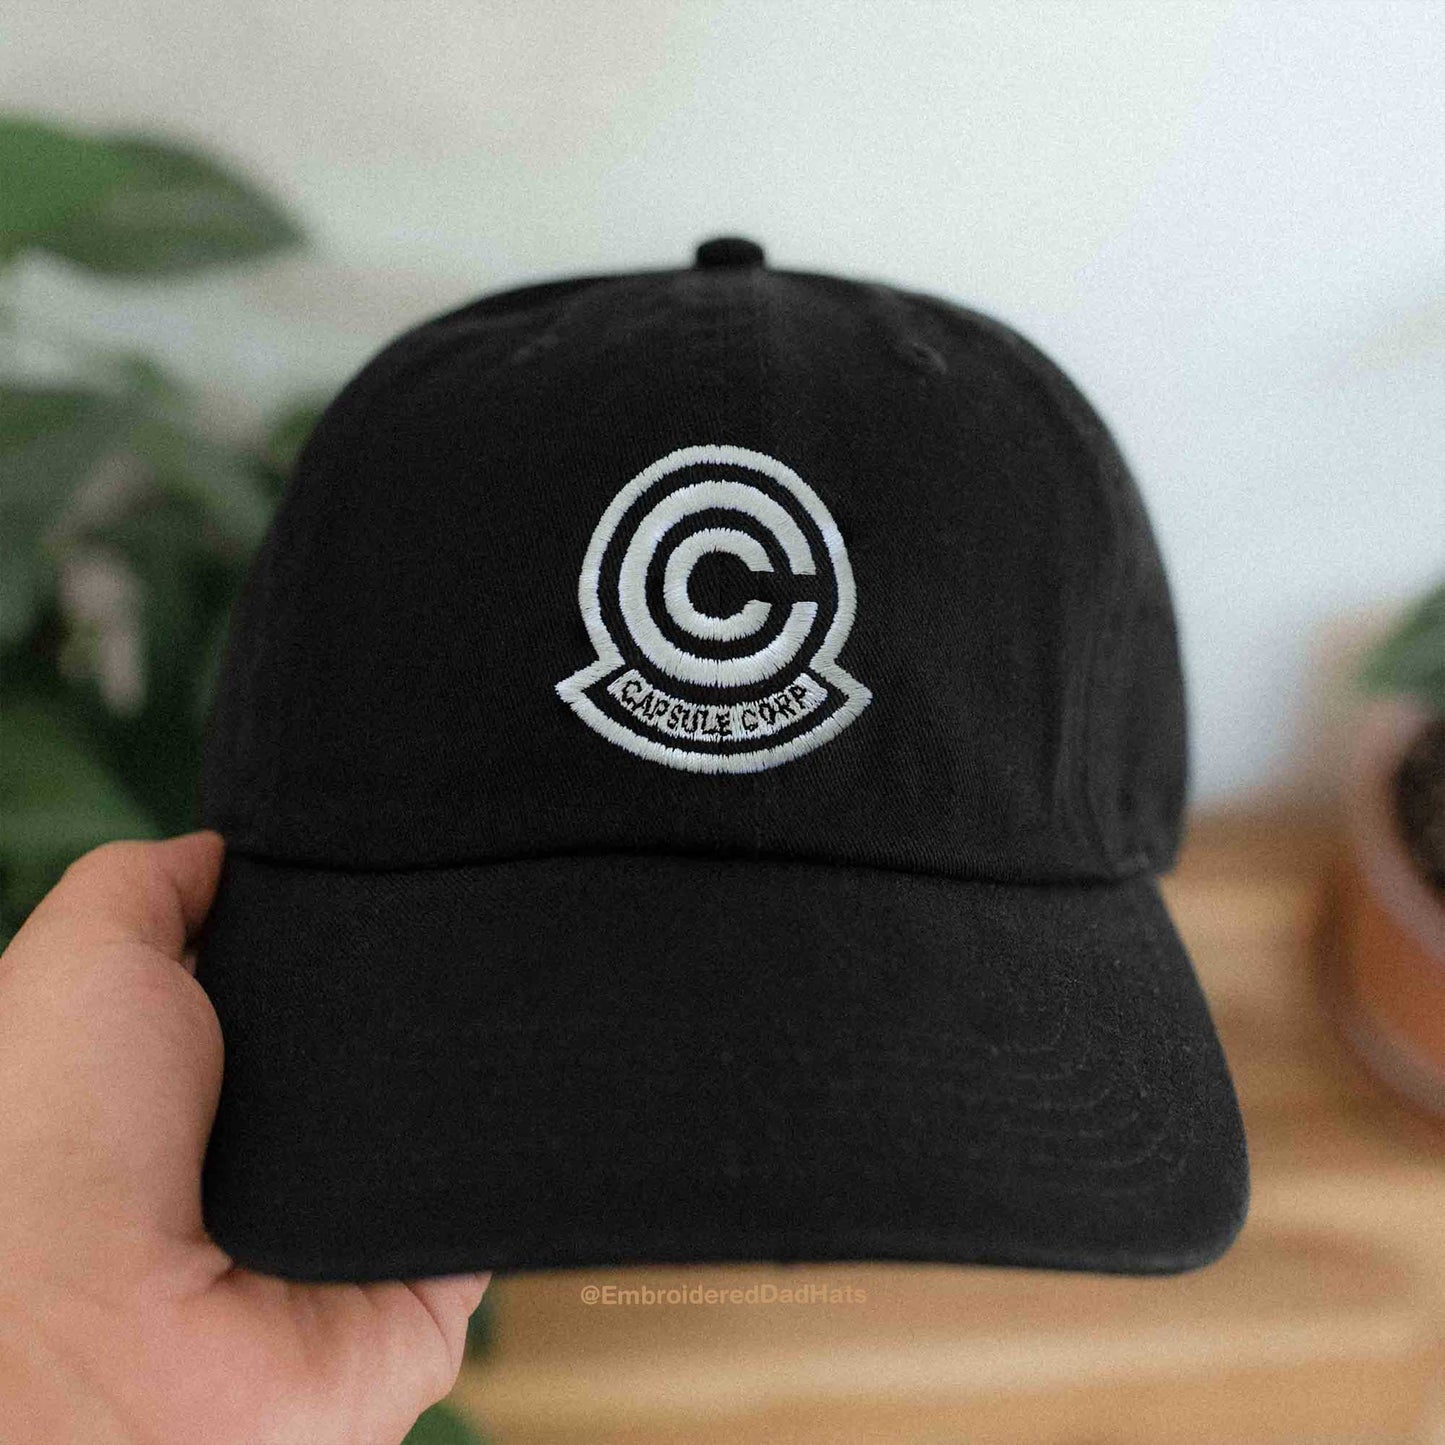 Capsule Corp Anime Embroidered Hat